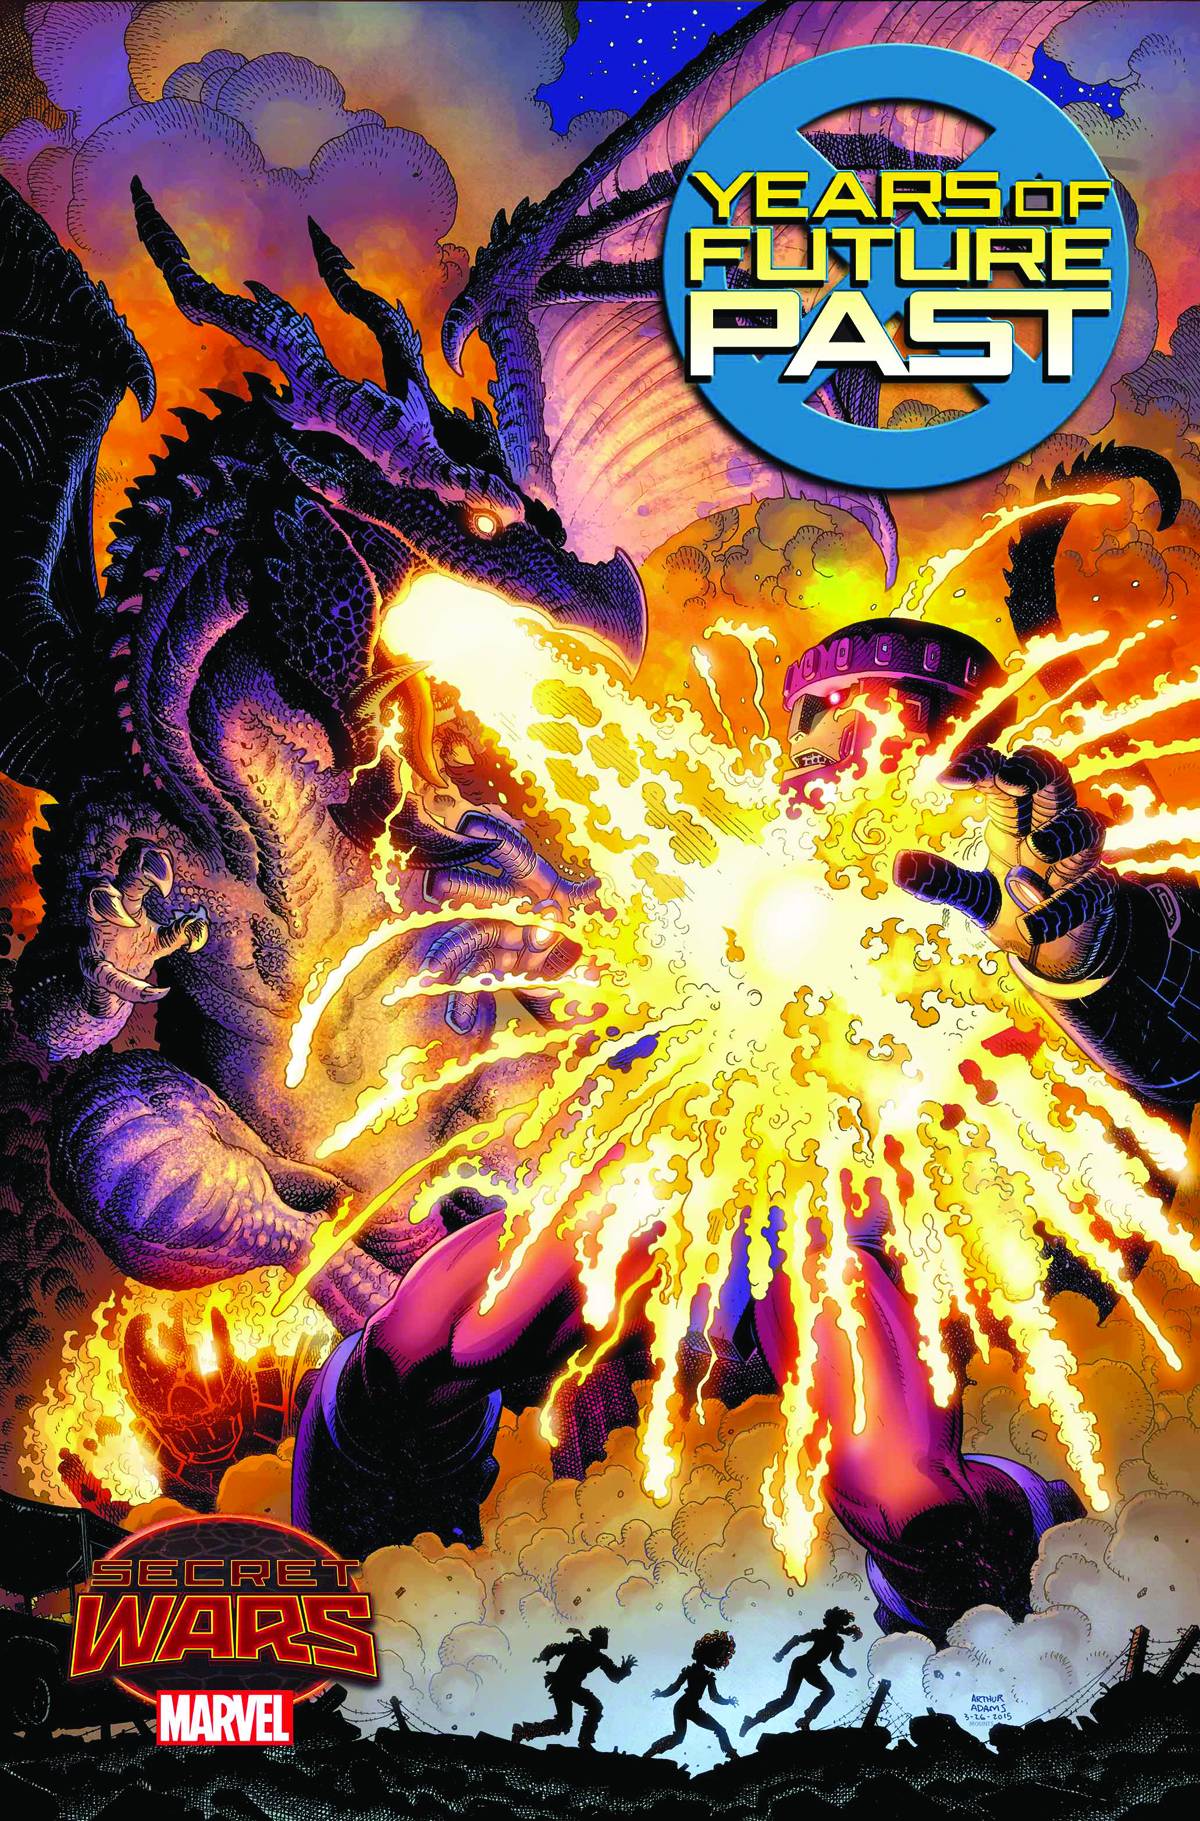 Years of Future Past #3 (2015)